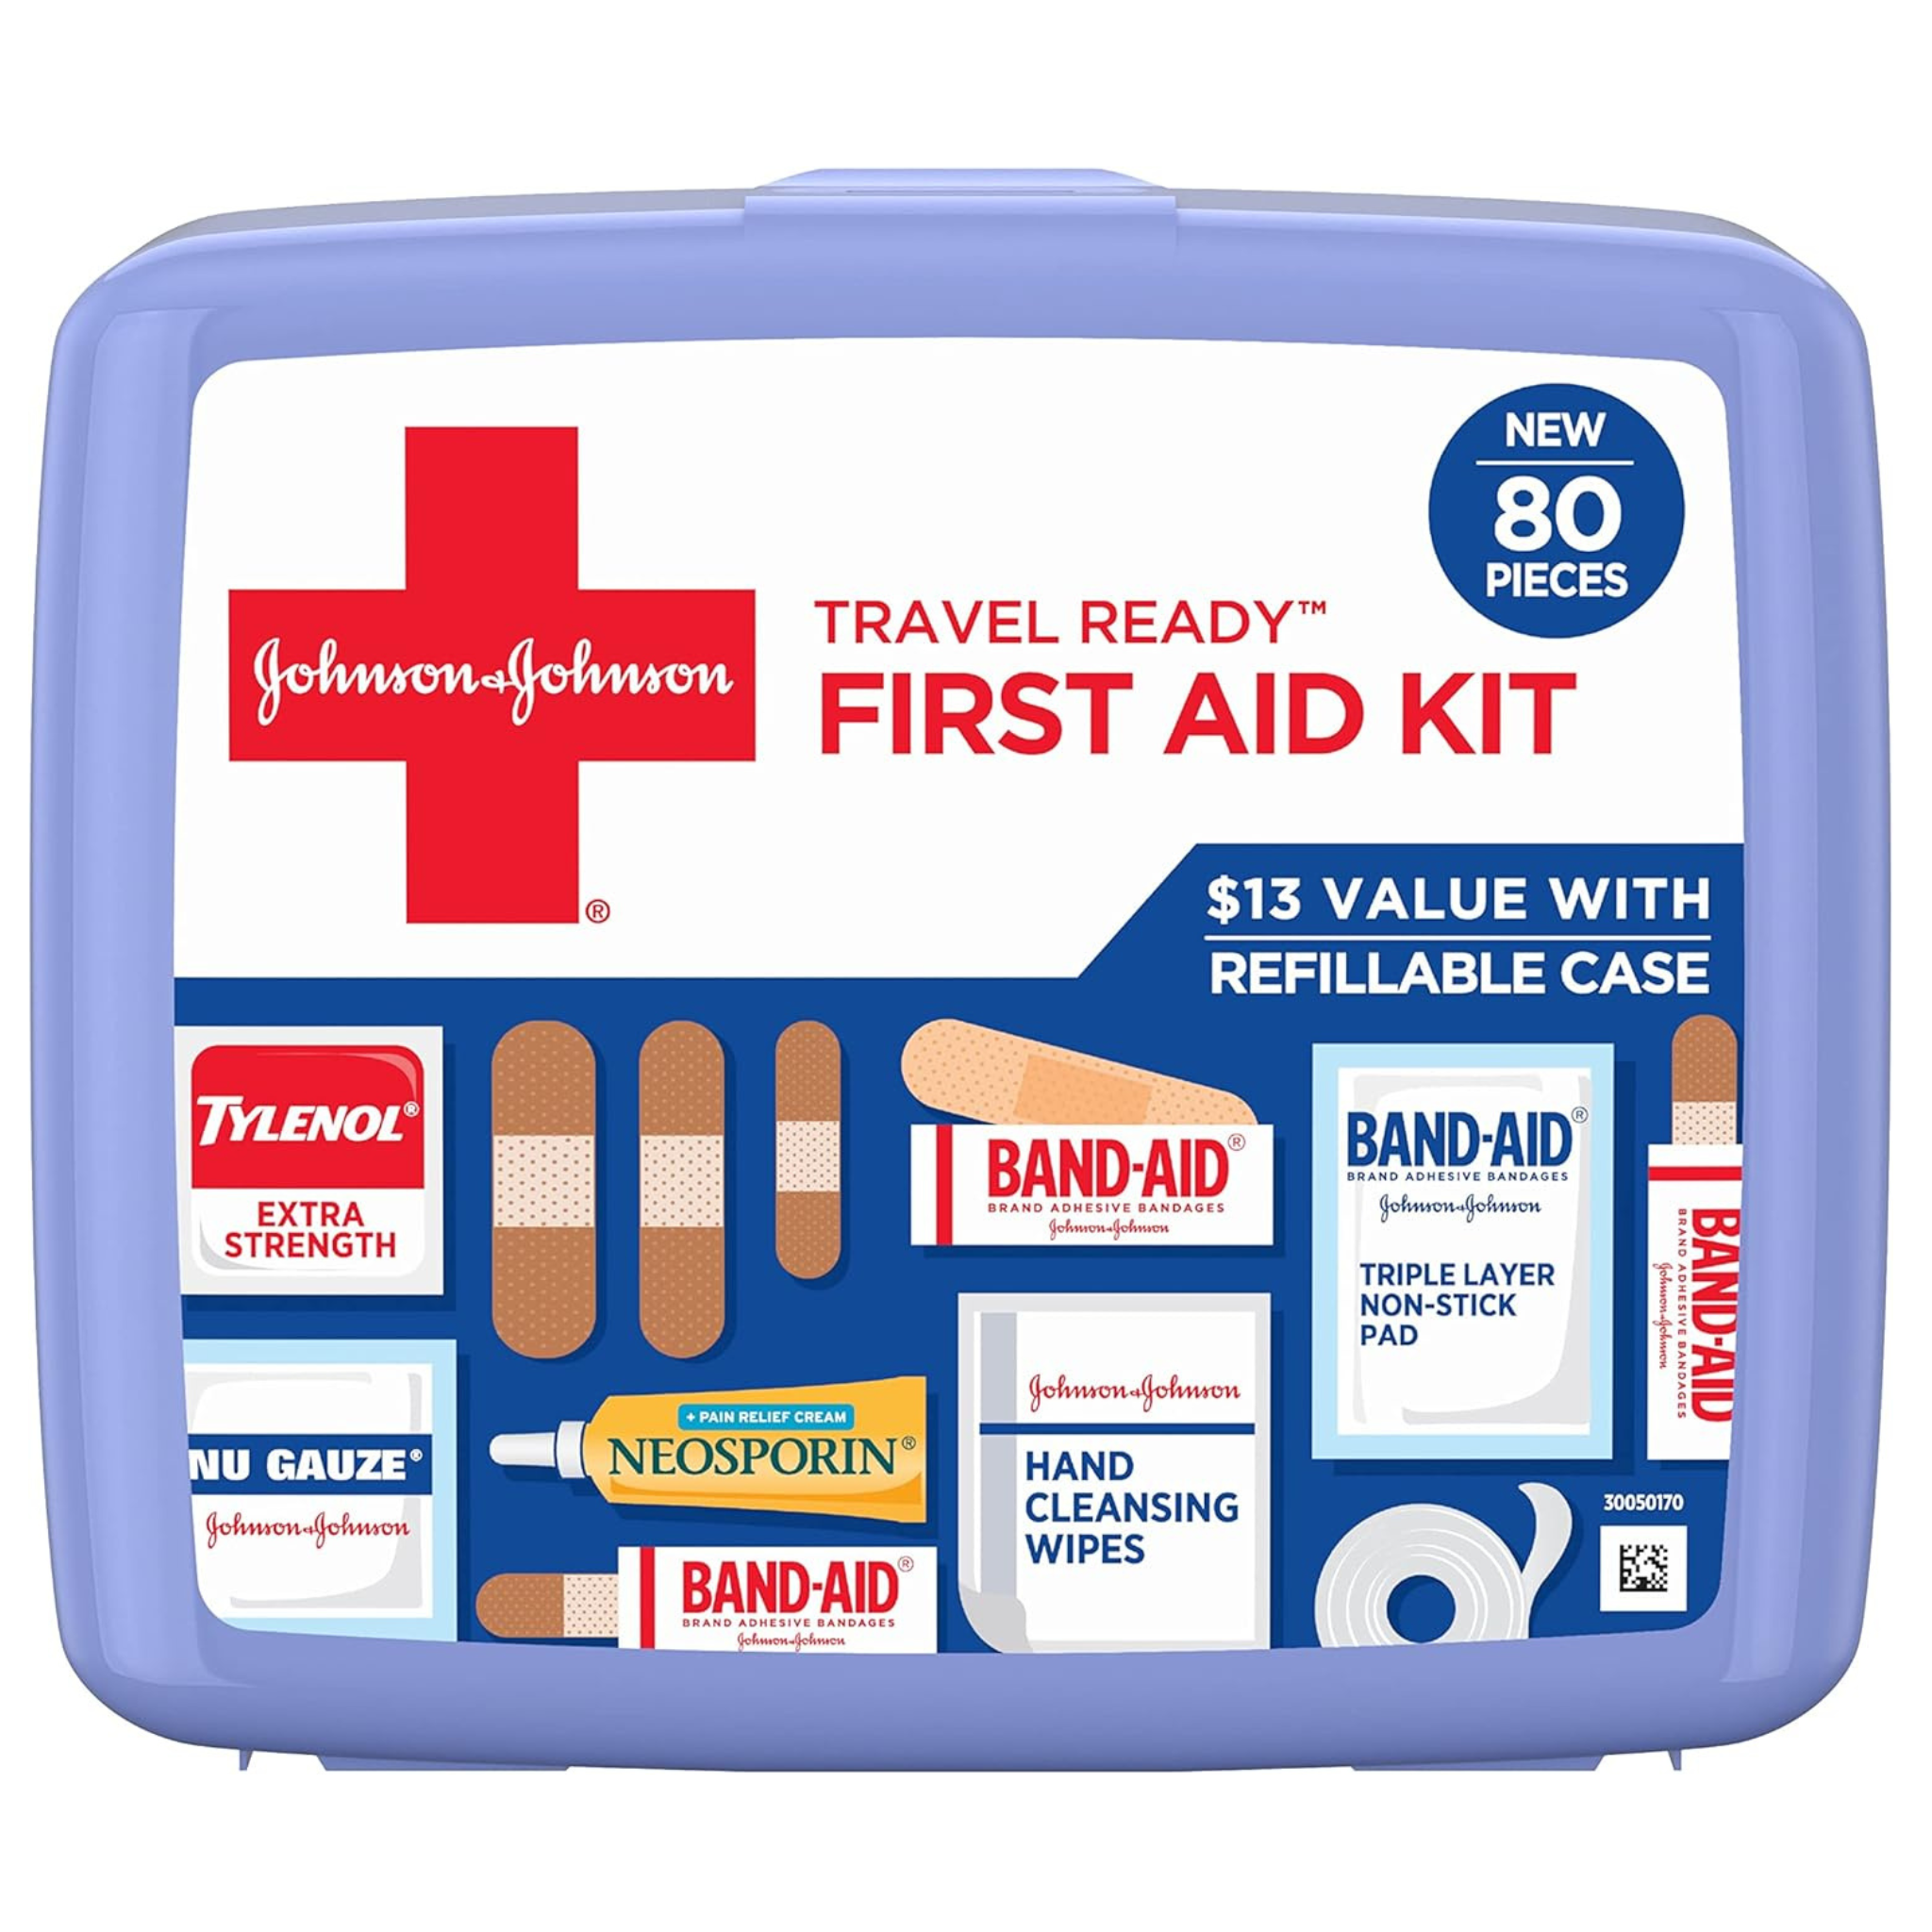 80-Piece Band-Aid Travel Ready Portable Emergency First Aid Kit